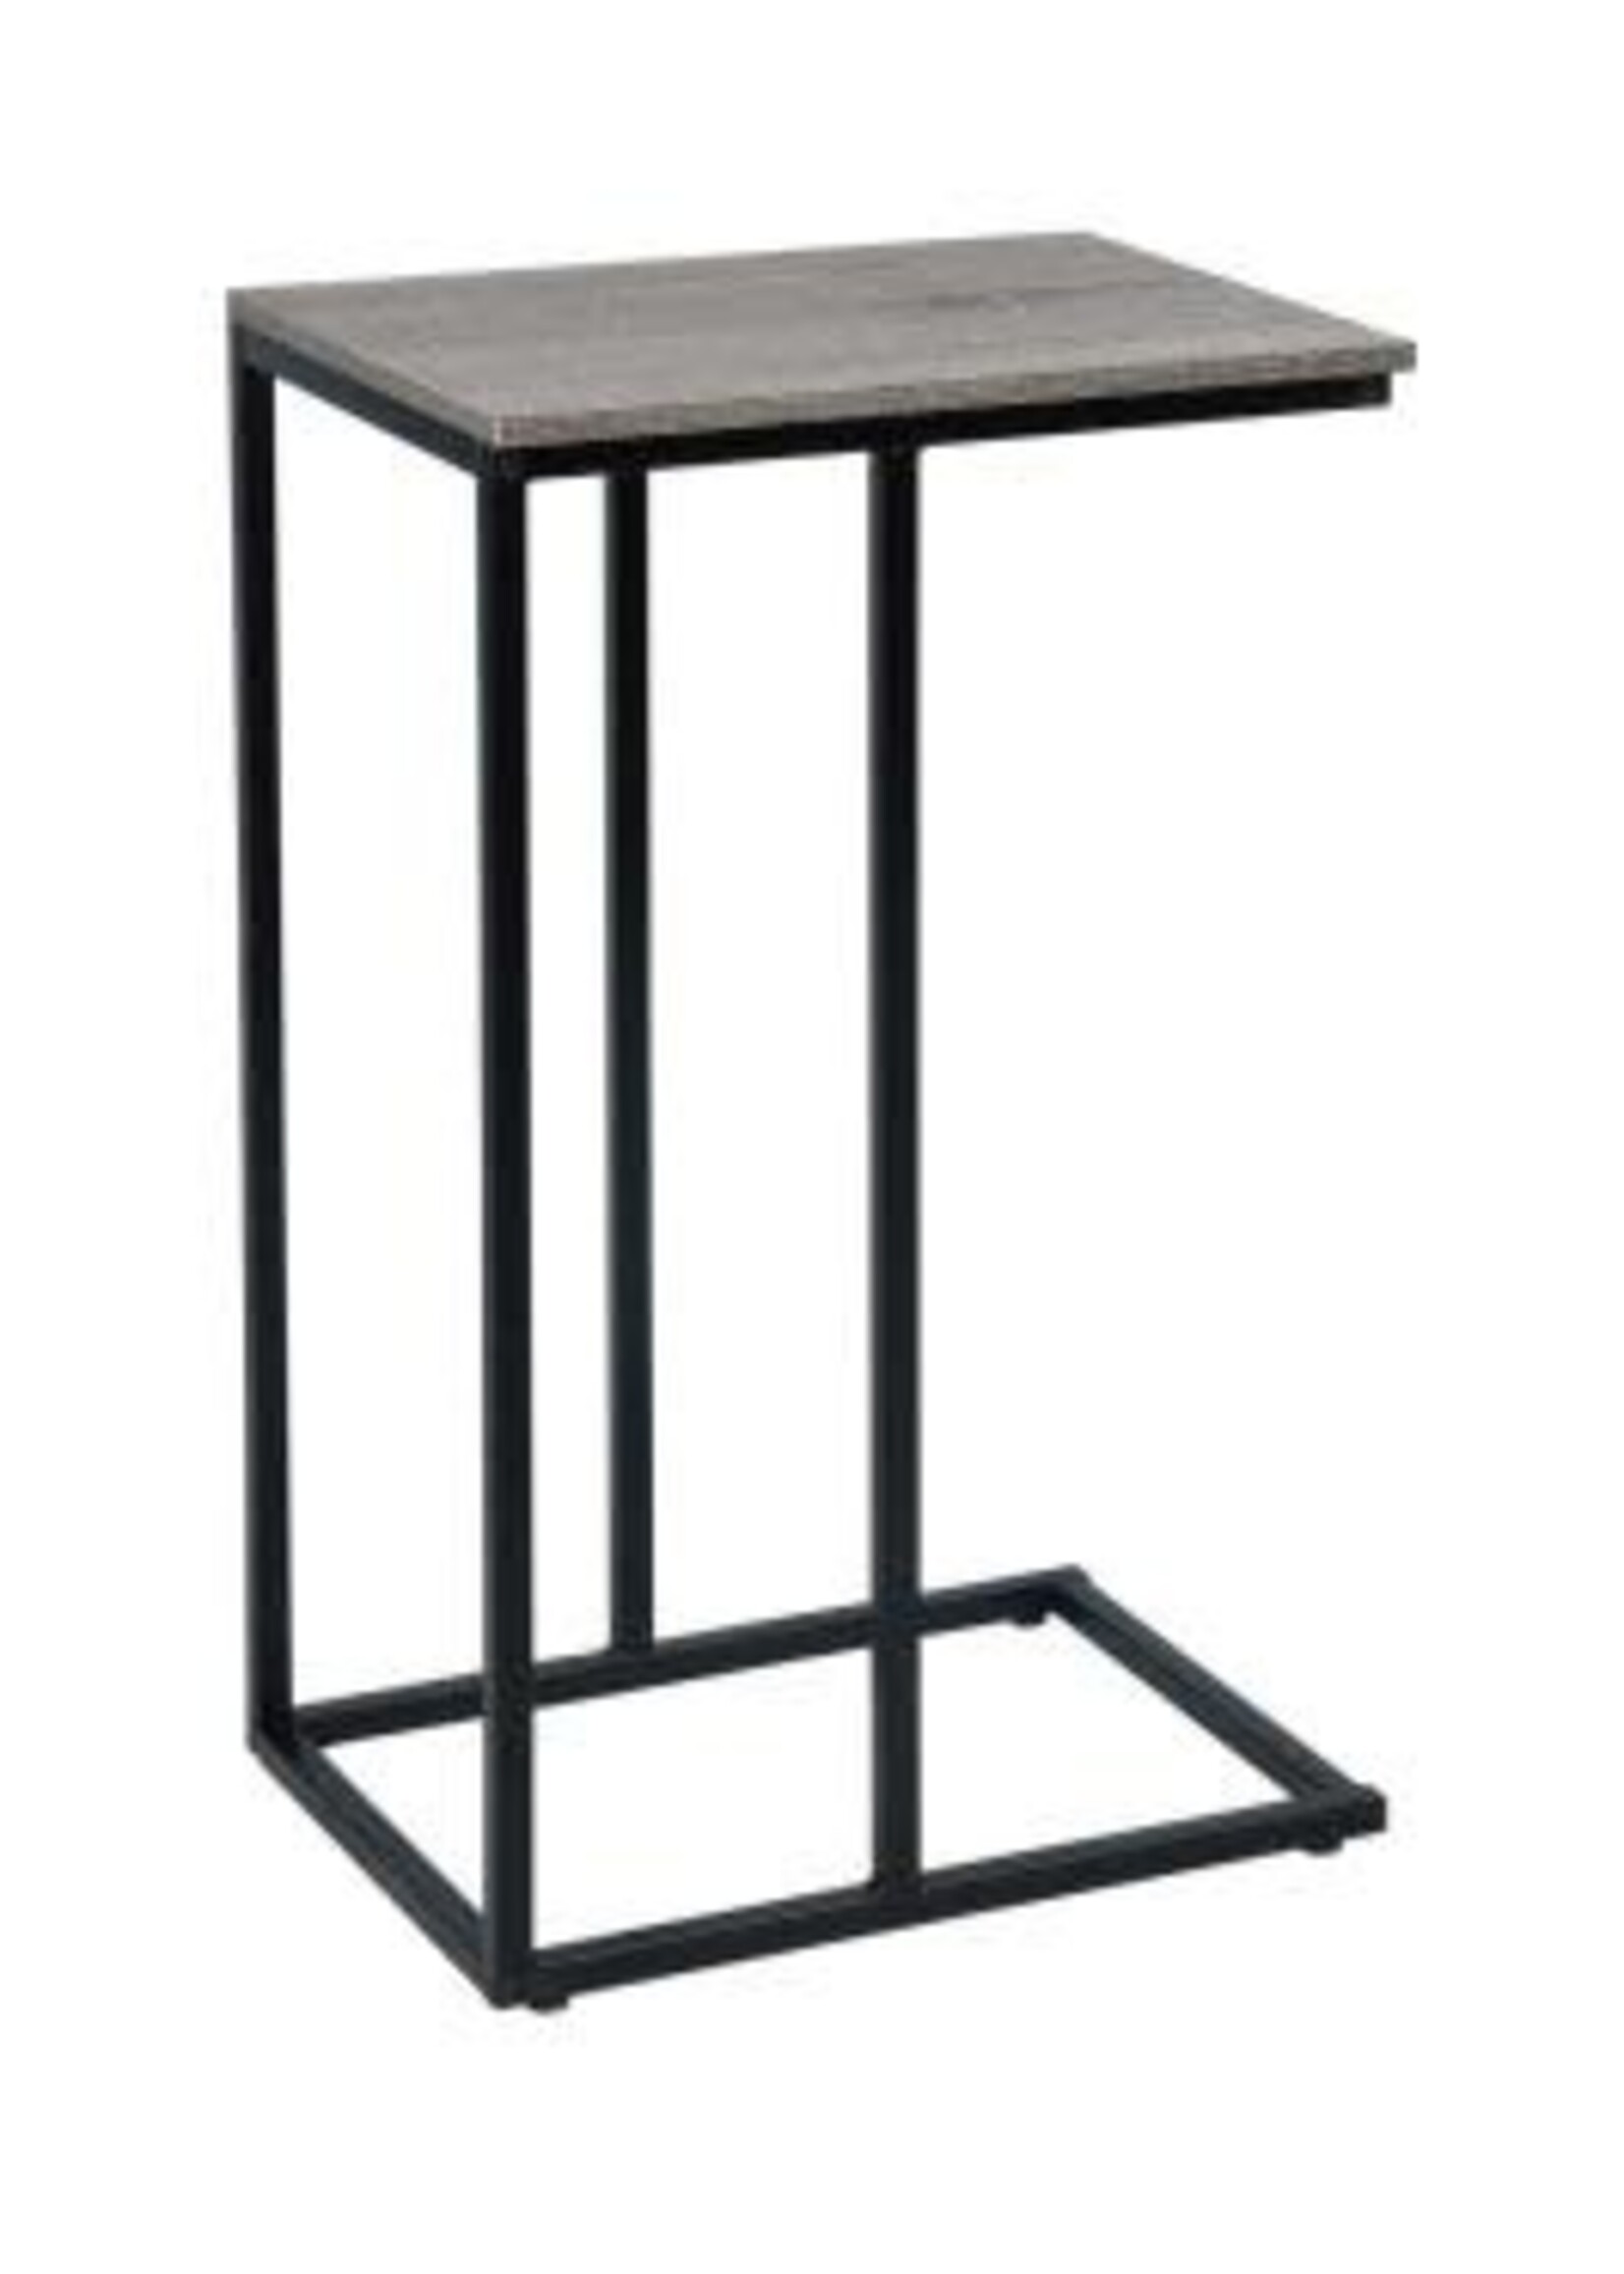 ITY INTERNATIONAL SIDE TABLE ACCENT TABLE